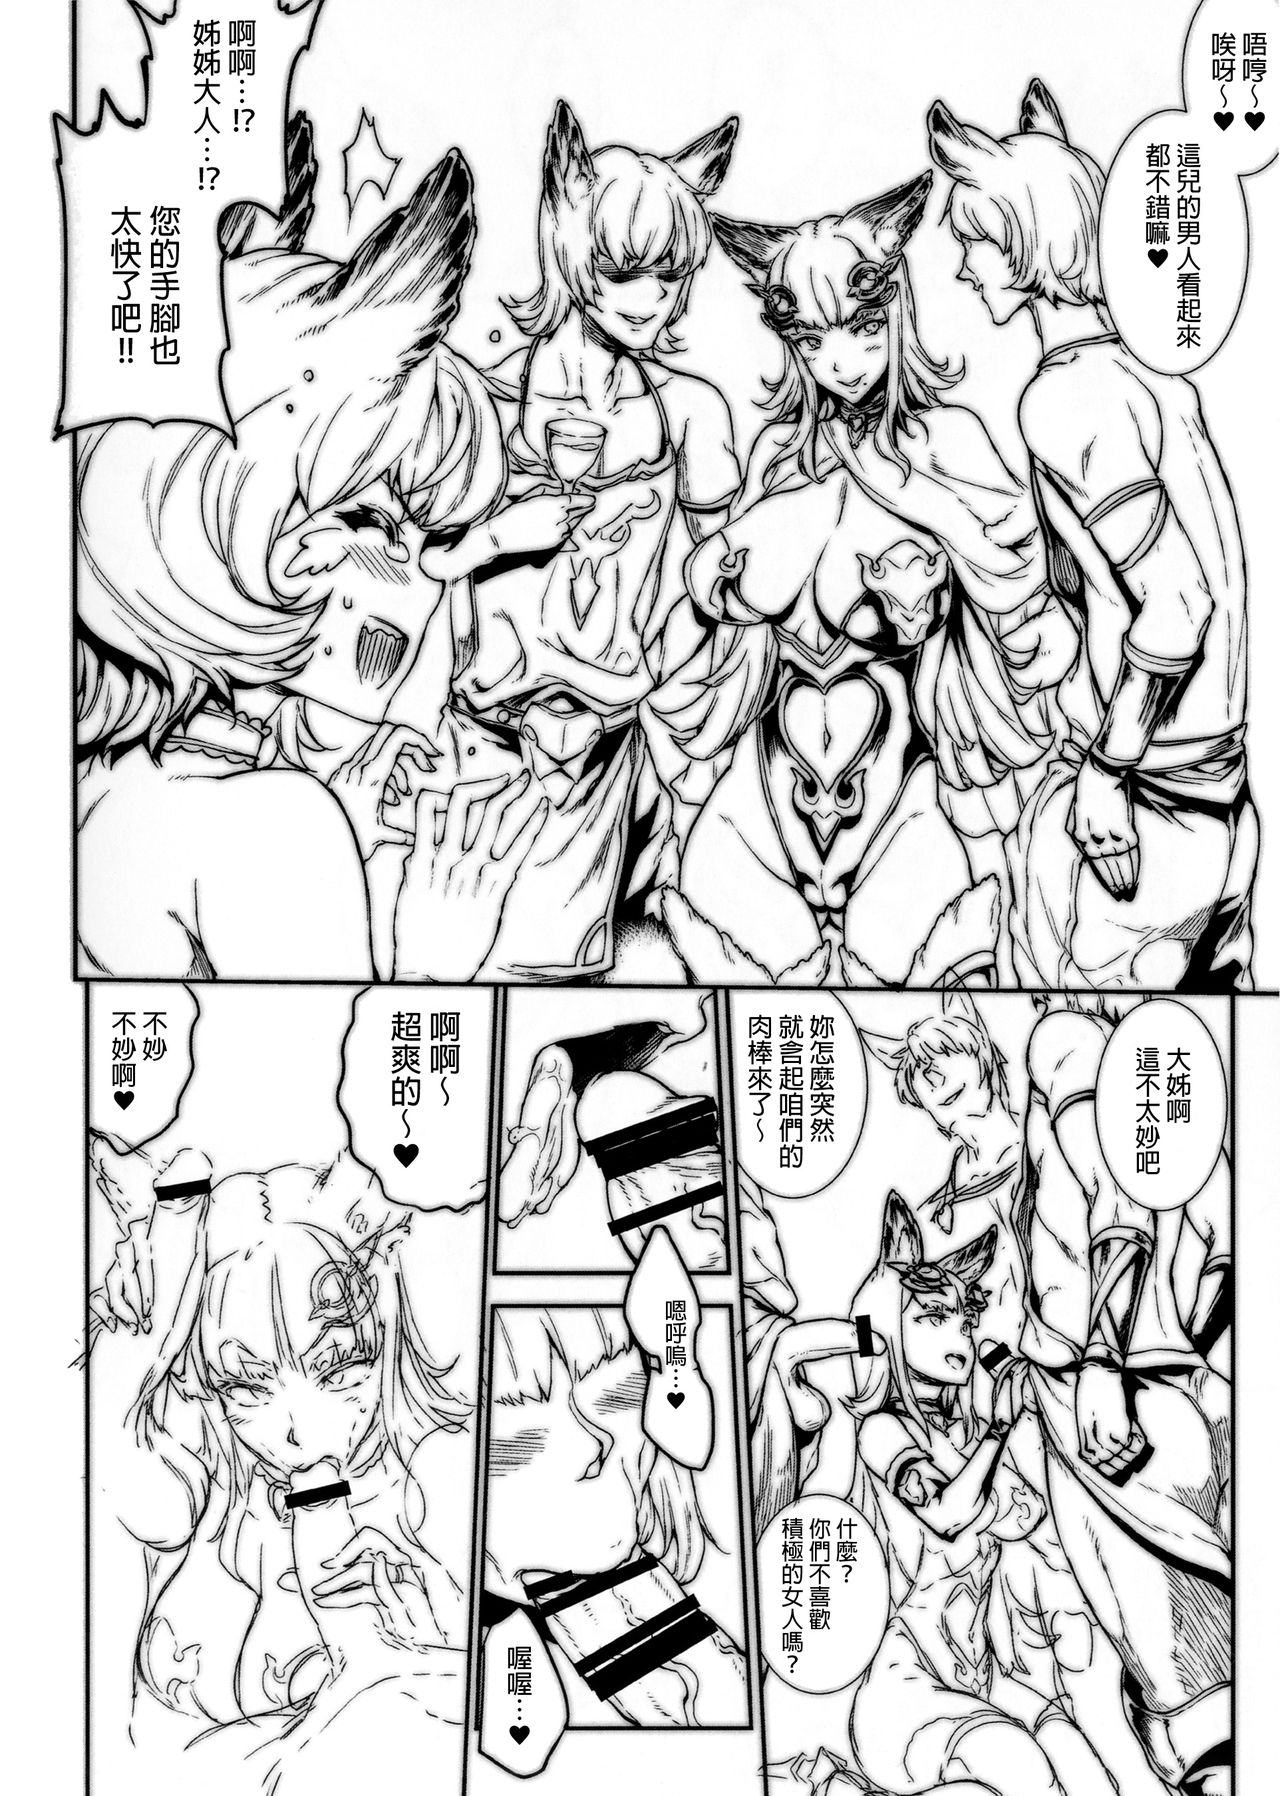 (COMIC1☆10) [ERECT TOUCH (Erect Sawaru)] BITCH & WITCH Preview Ban ＋ Tanzaku Poster (Granblue Fantasy) [Chinese] [final個人漢化] (COMIC1☆10) [ERECT TOUCH (エレクトさわる)] BITCH & WITCH プレビュー版 + 短冊ポスター (グランブルーファンタジー) [中国翻訳]